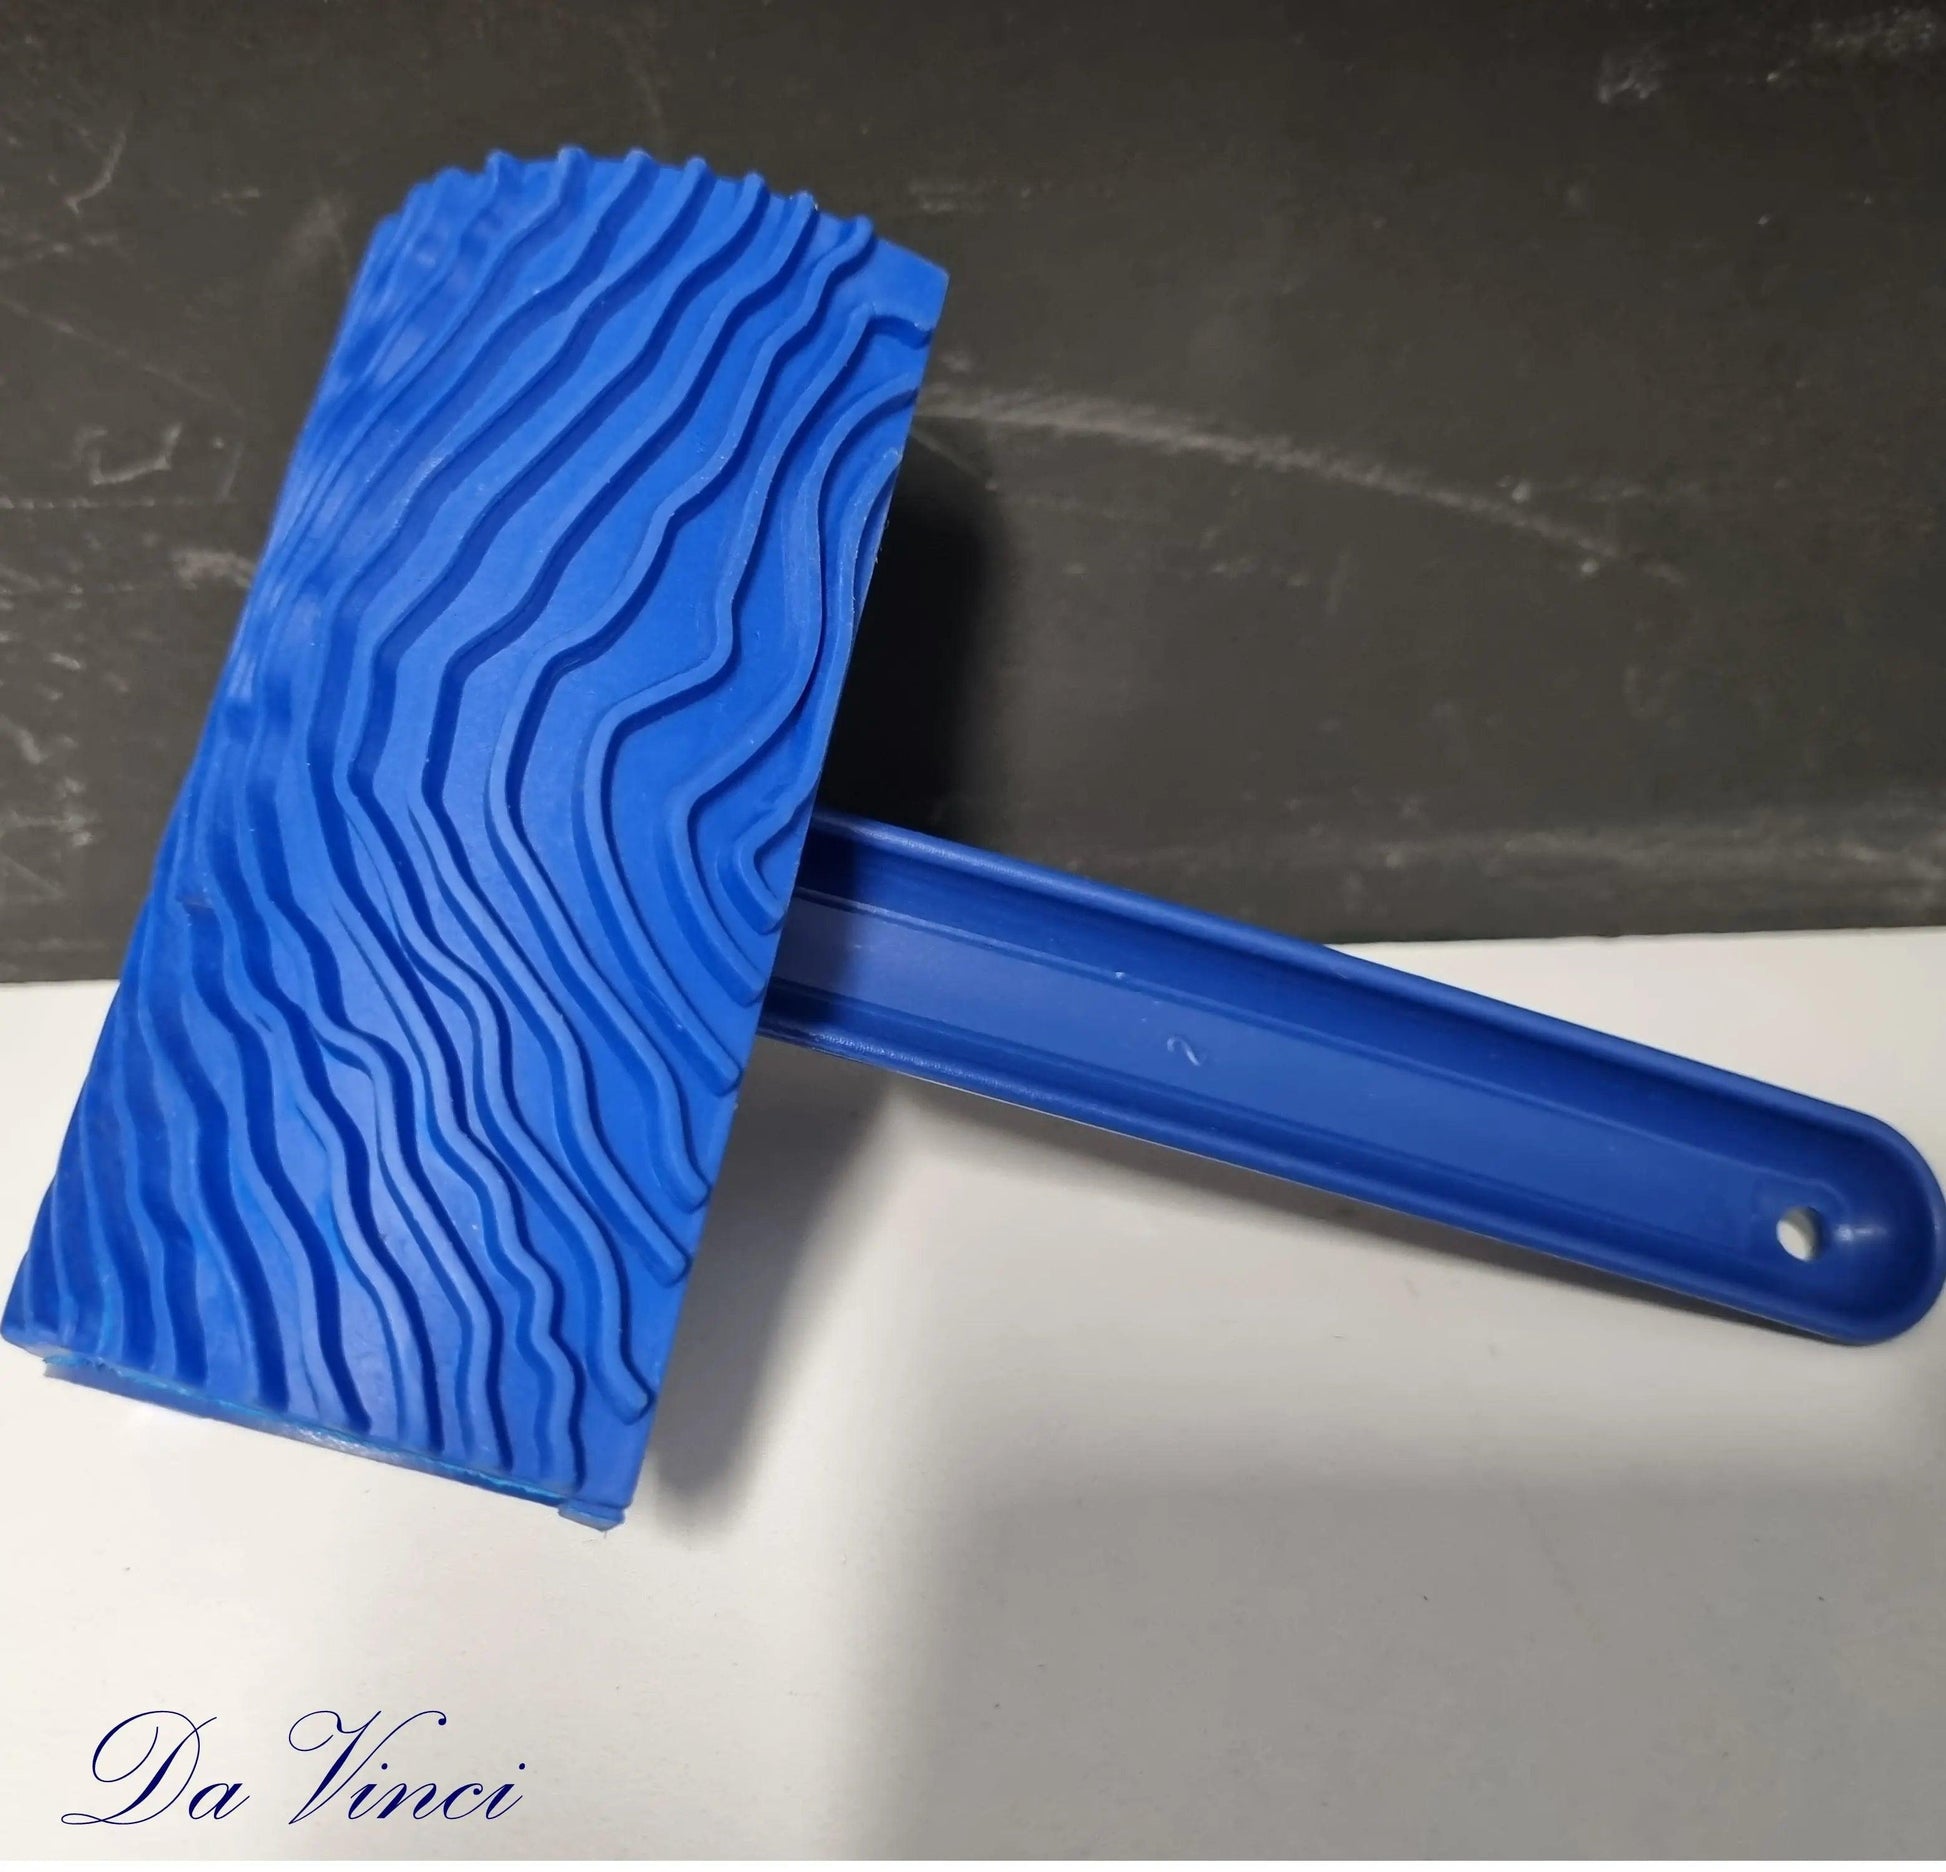 Products Trade Paint wood Grainer tool-effect Rocker 100mm - Vintique Concepts